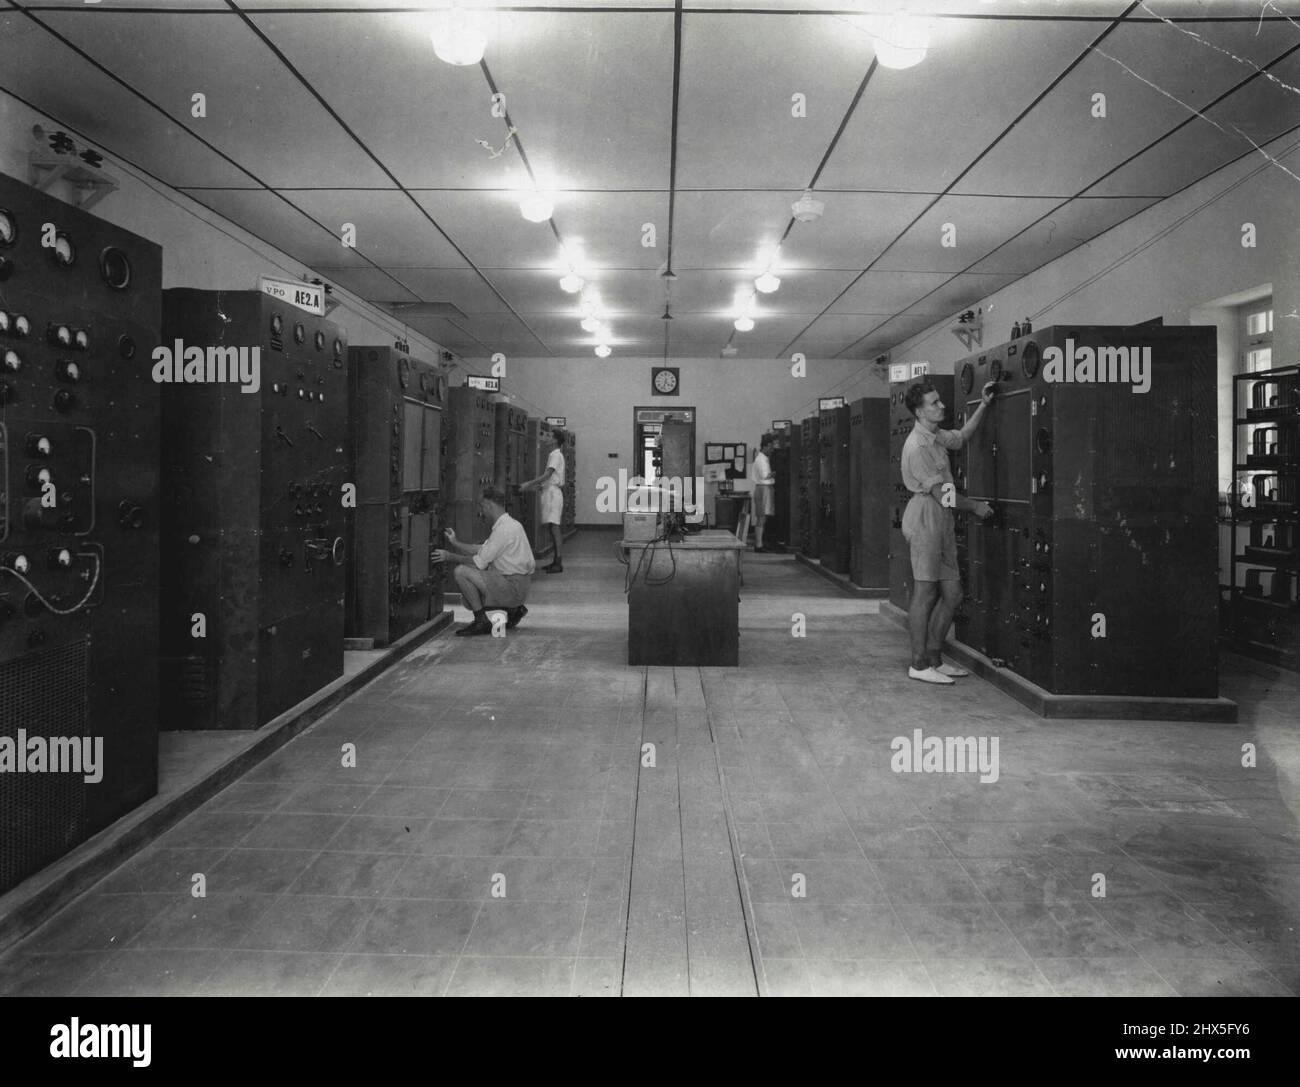 The Transmitting Hall at Station VPO3 Bridgetown, Barbados, B.W.I. This station is owned by Cable & Wireless (W.I.) Ltd. and transmits on 10.605 mc. November 05, 1948. Stock Photo